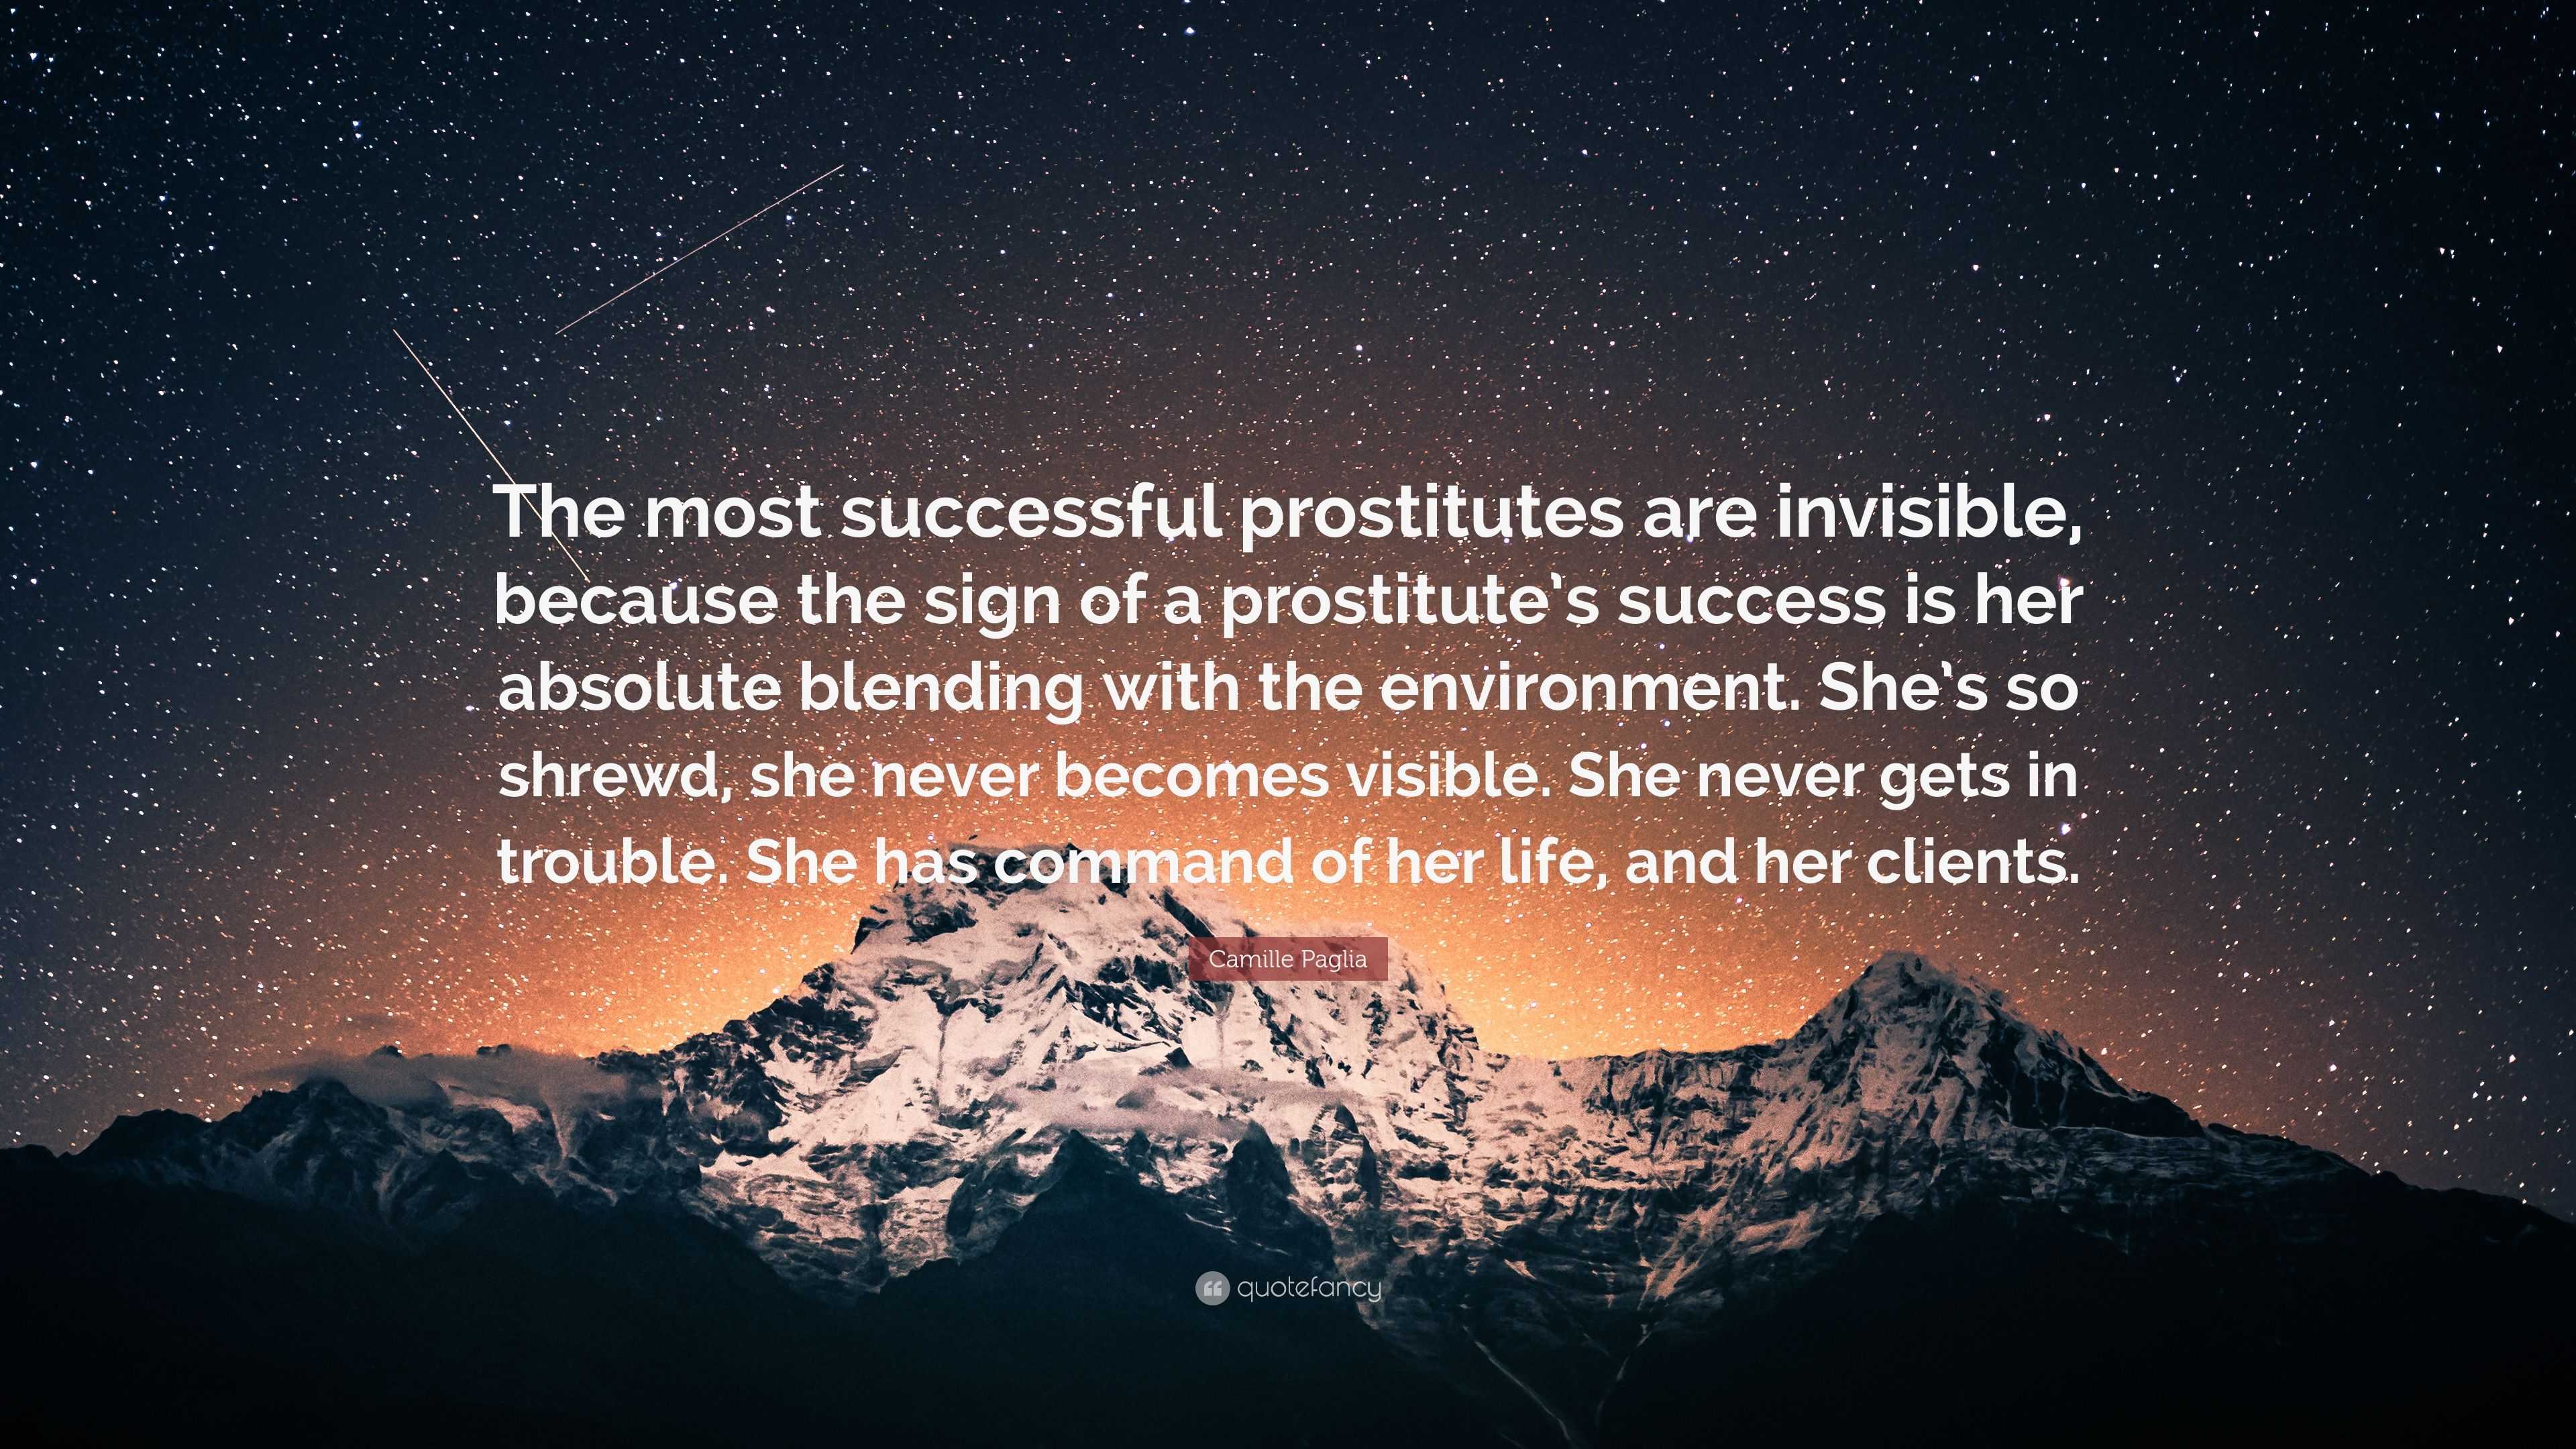 https://quotefancy.com/media/wallpaper/3840x2160/5441080-Camille-Paglia-Quote-The-most-successful-prostitutes-are-invisible.jpg